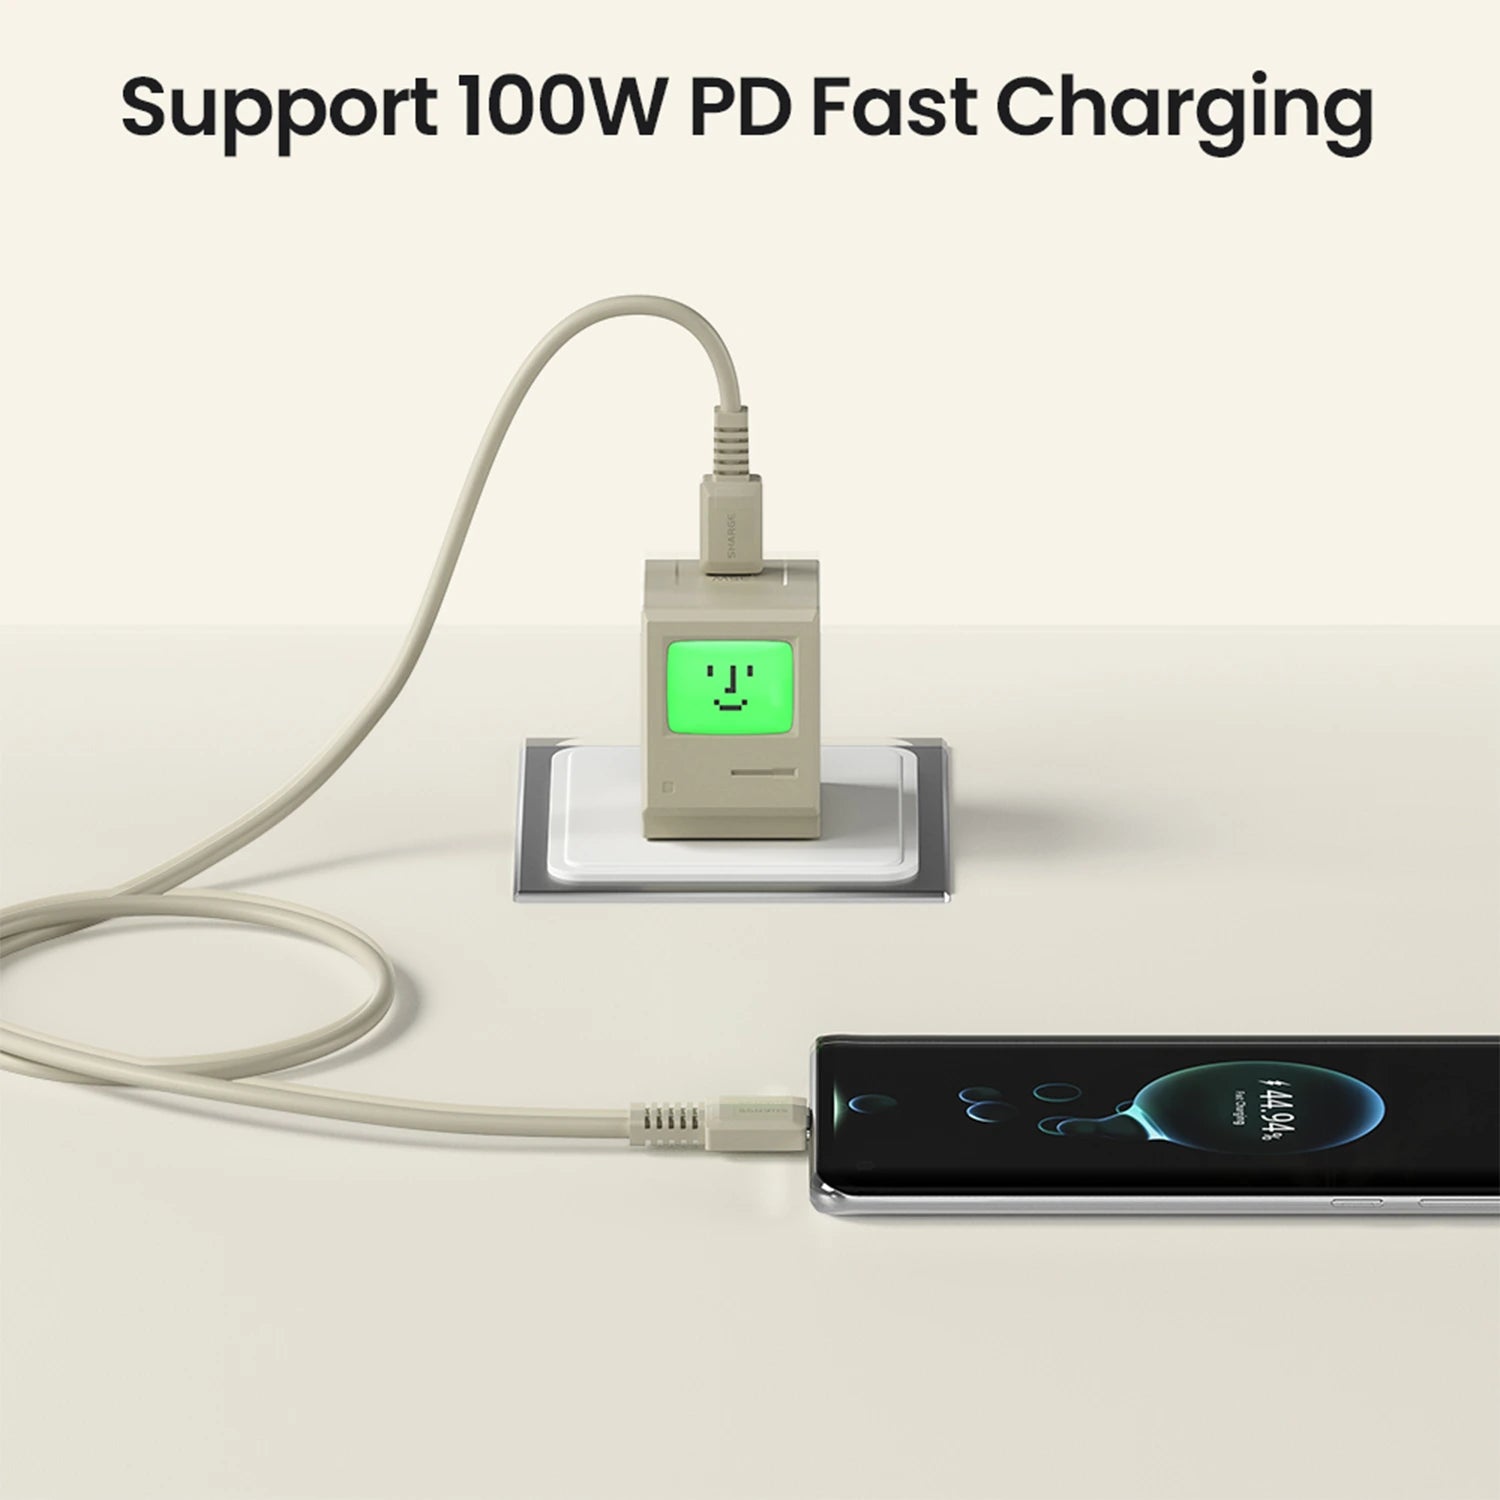 Shargeek SL108 Retro 100W PD Fast Charging USB-C to USB-C Cable 1.2m PD E-marker, Retro White